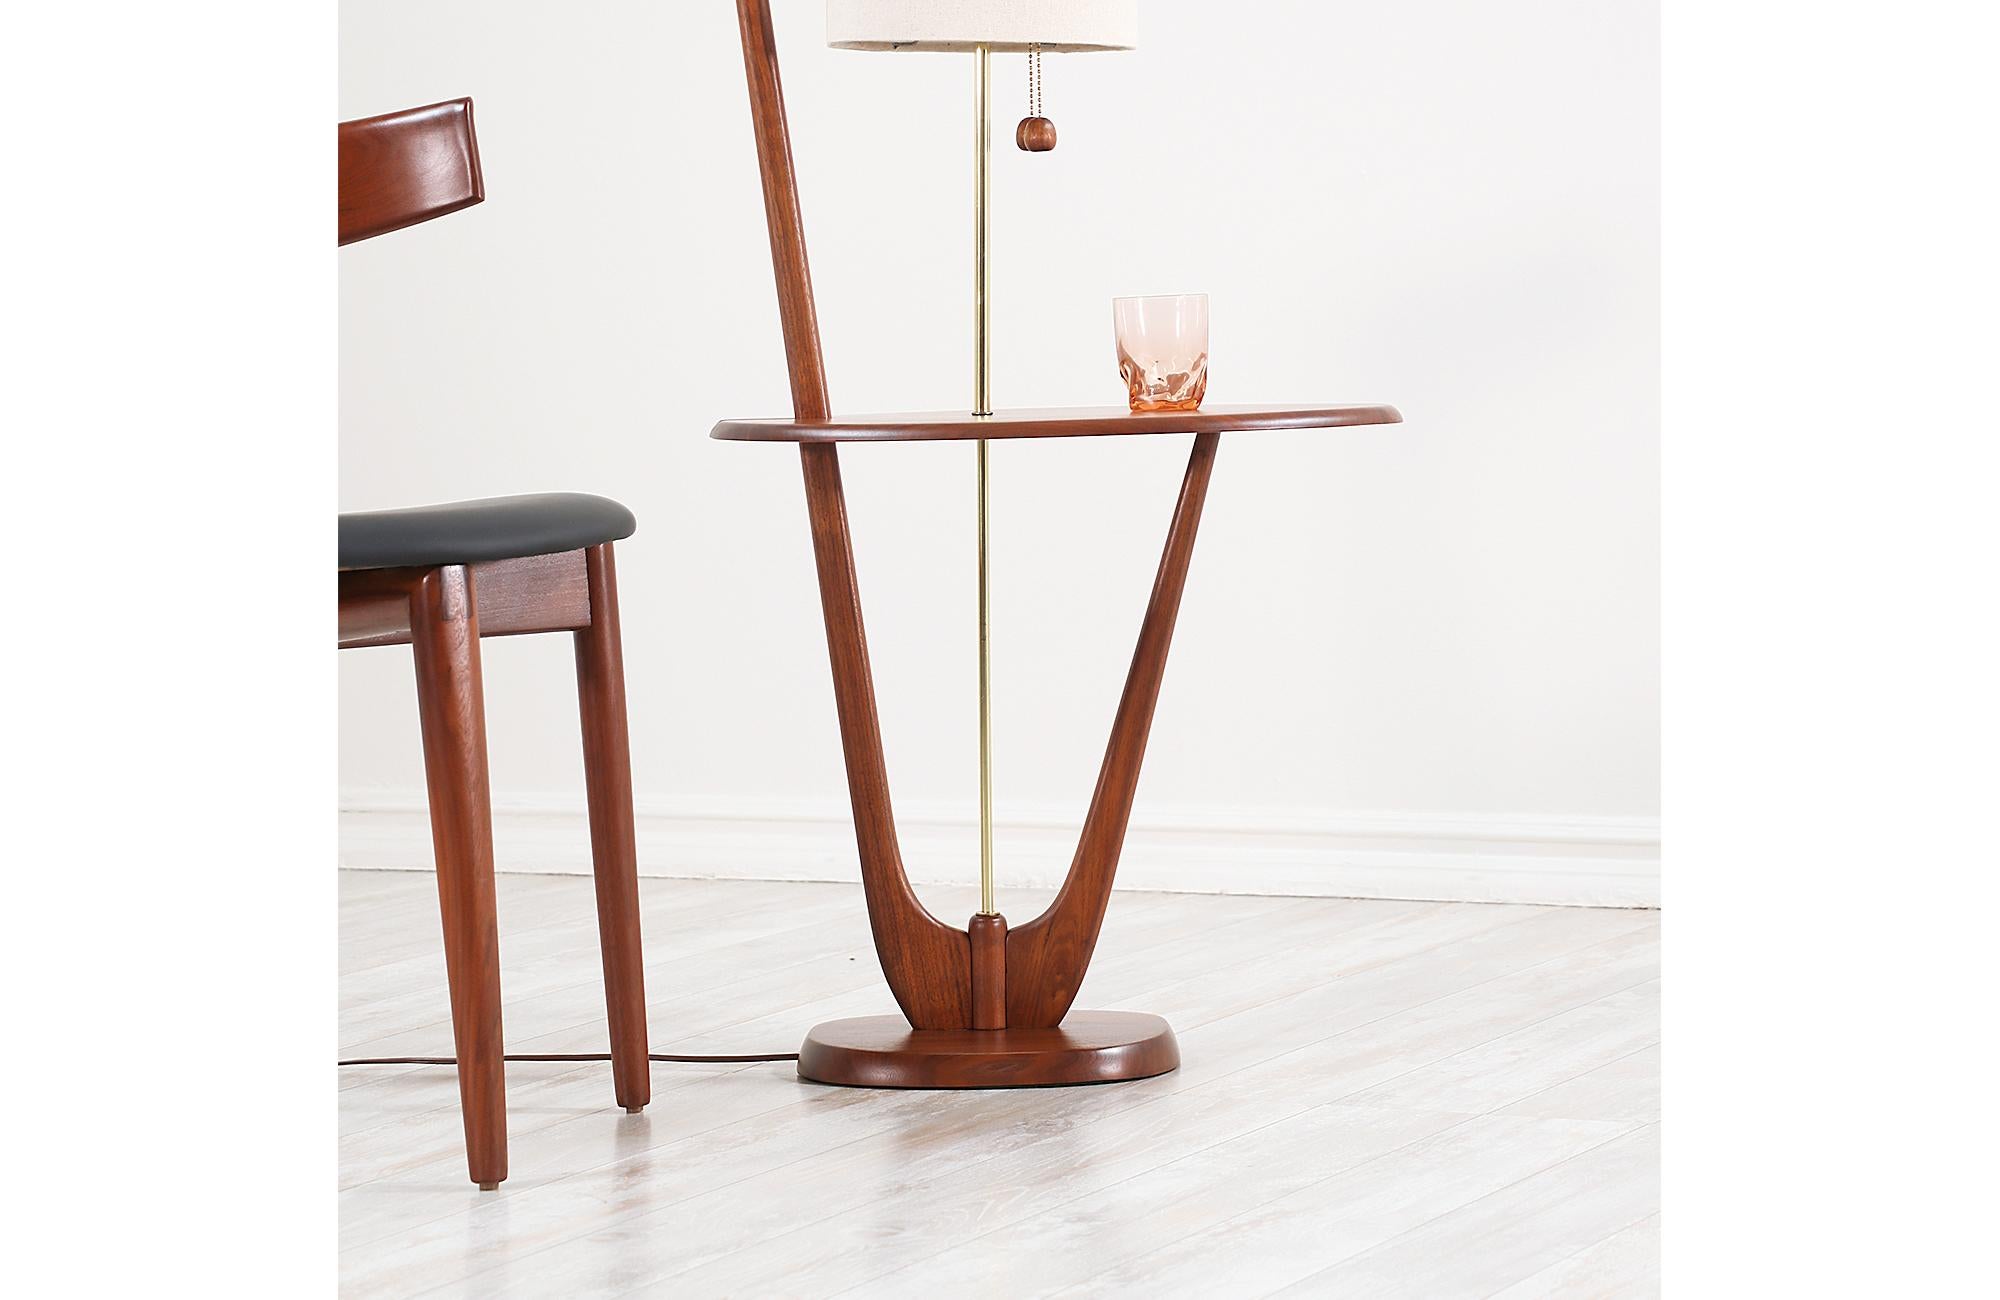 American Mid-Century Modern Sculpted Walnut Floor Lamp with Side Table